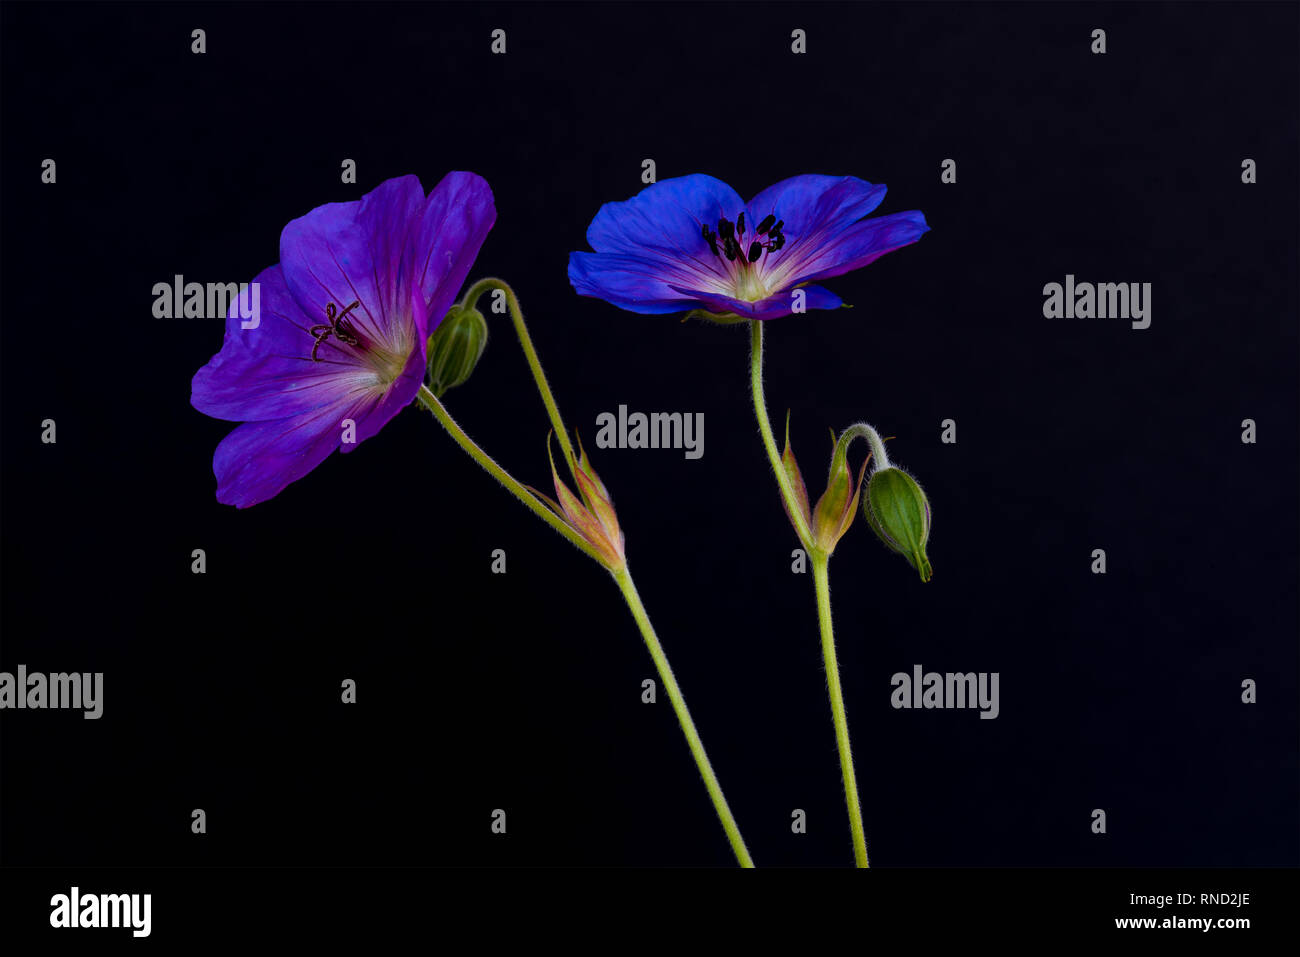 Fine art still life color floral image of a pair of blue violet isolated wide open male and female geranium/cranesbill blossoms,black background Stock Photo